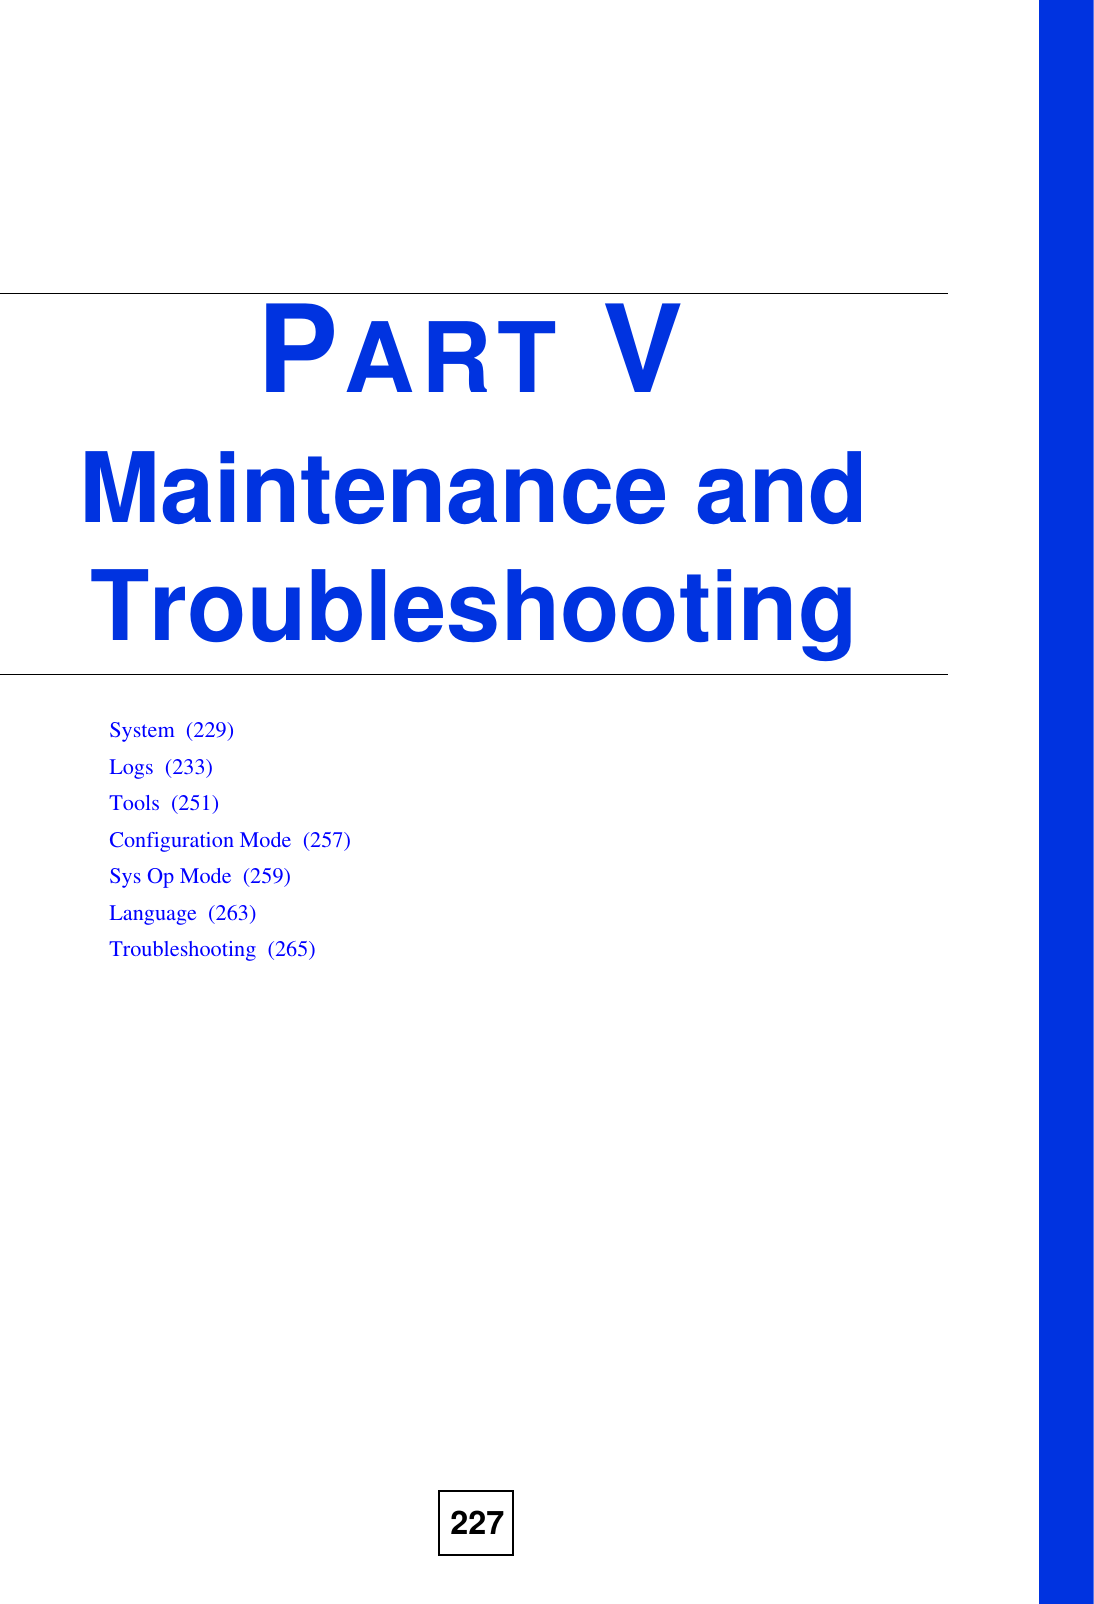 227PART VMaintenance and TroubleshootingSystem  (229)Logs  (233)Tools  (251)Configuration Mode  (257)Sys Op Mode  (259)Language  (263)Troubleshooting  (265)